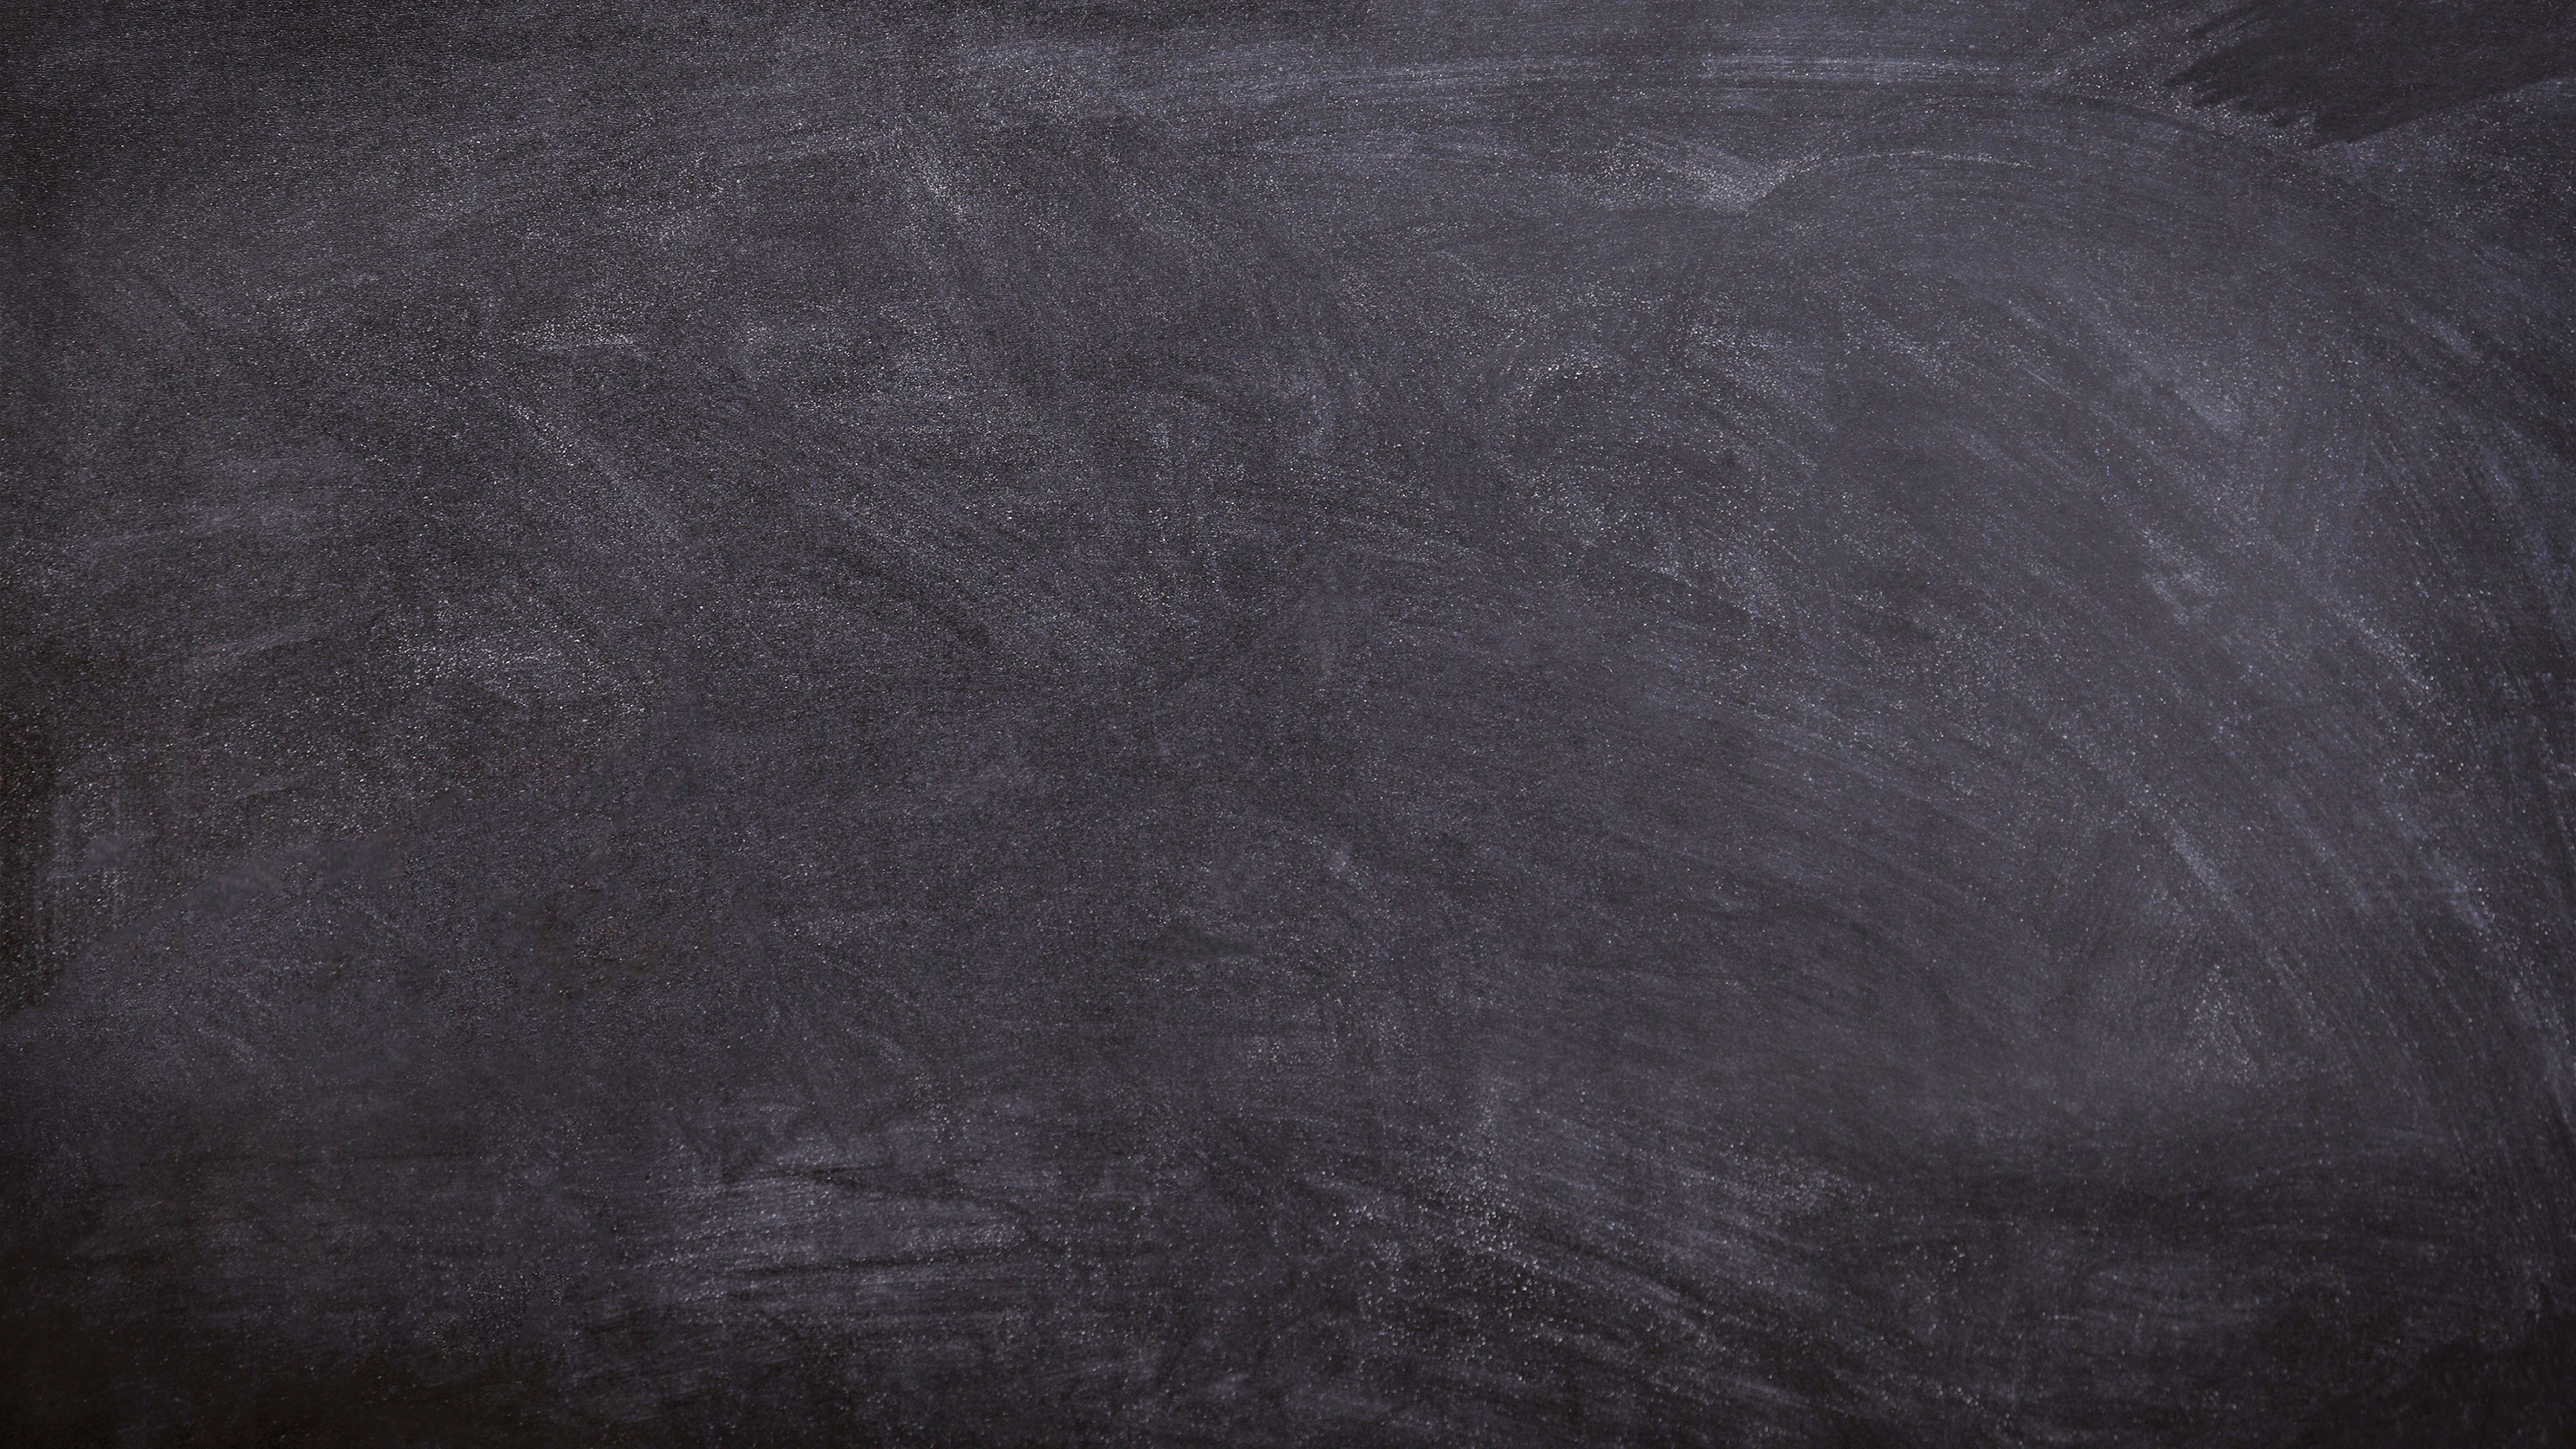 Free Chalkboard Chromebook Wallpaper Ready For Download HD Wallpapers Download Free Map Images Wallpaper [wallpaper684.blogspot.com]